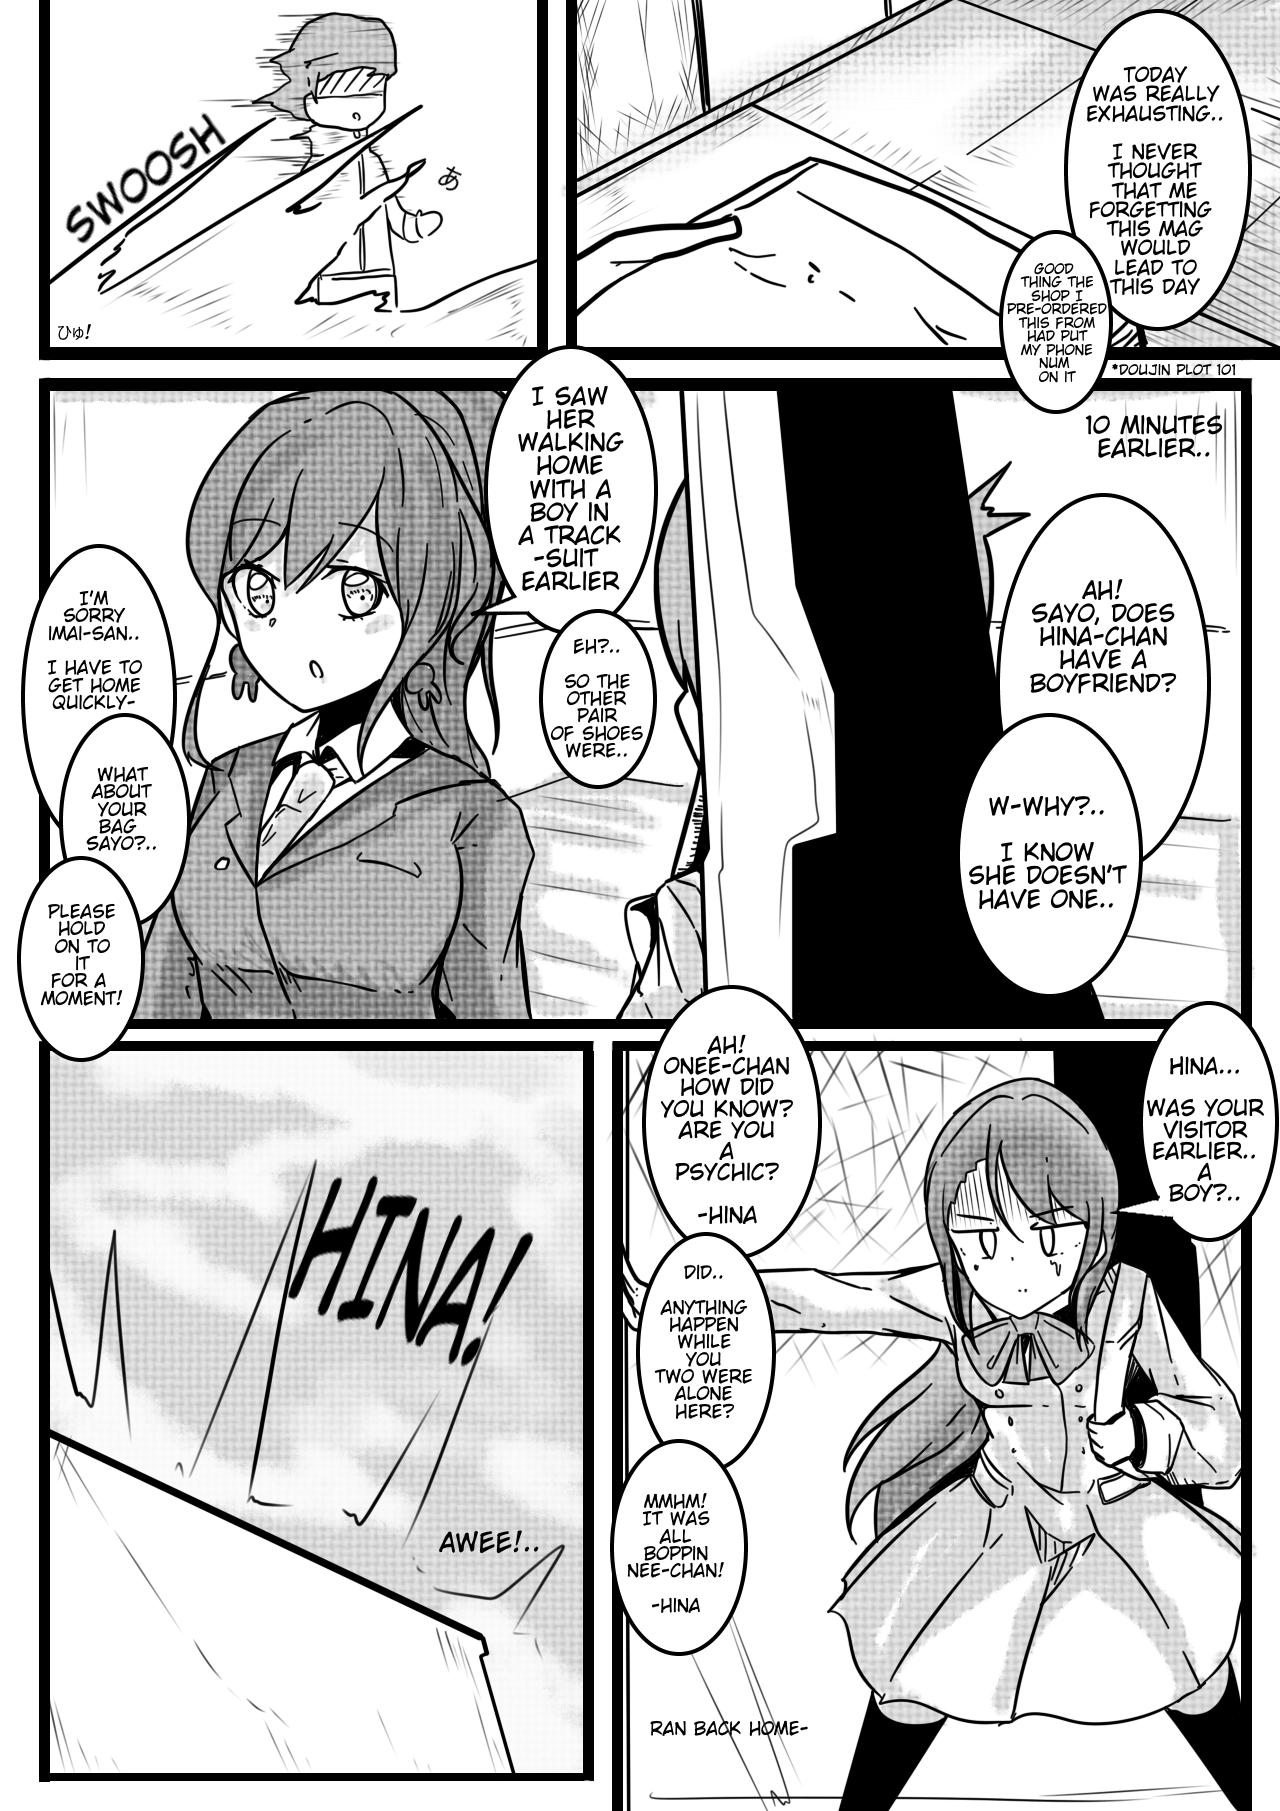 Nasty Minty Surprise - Bang dream Pasivo - Page 22